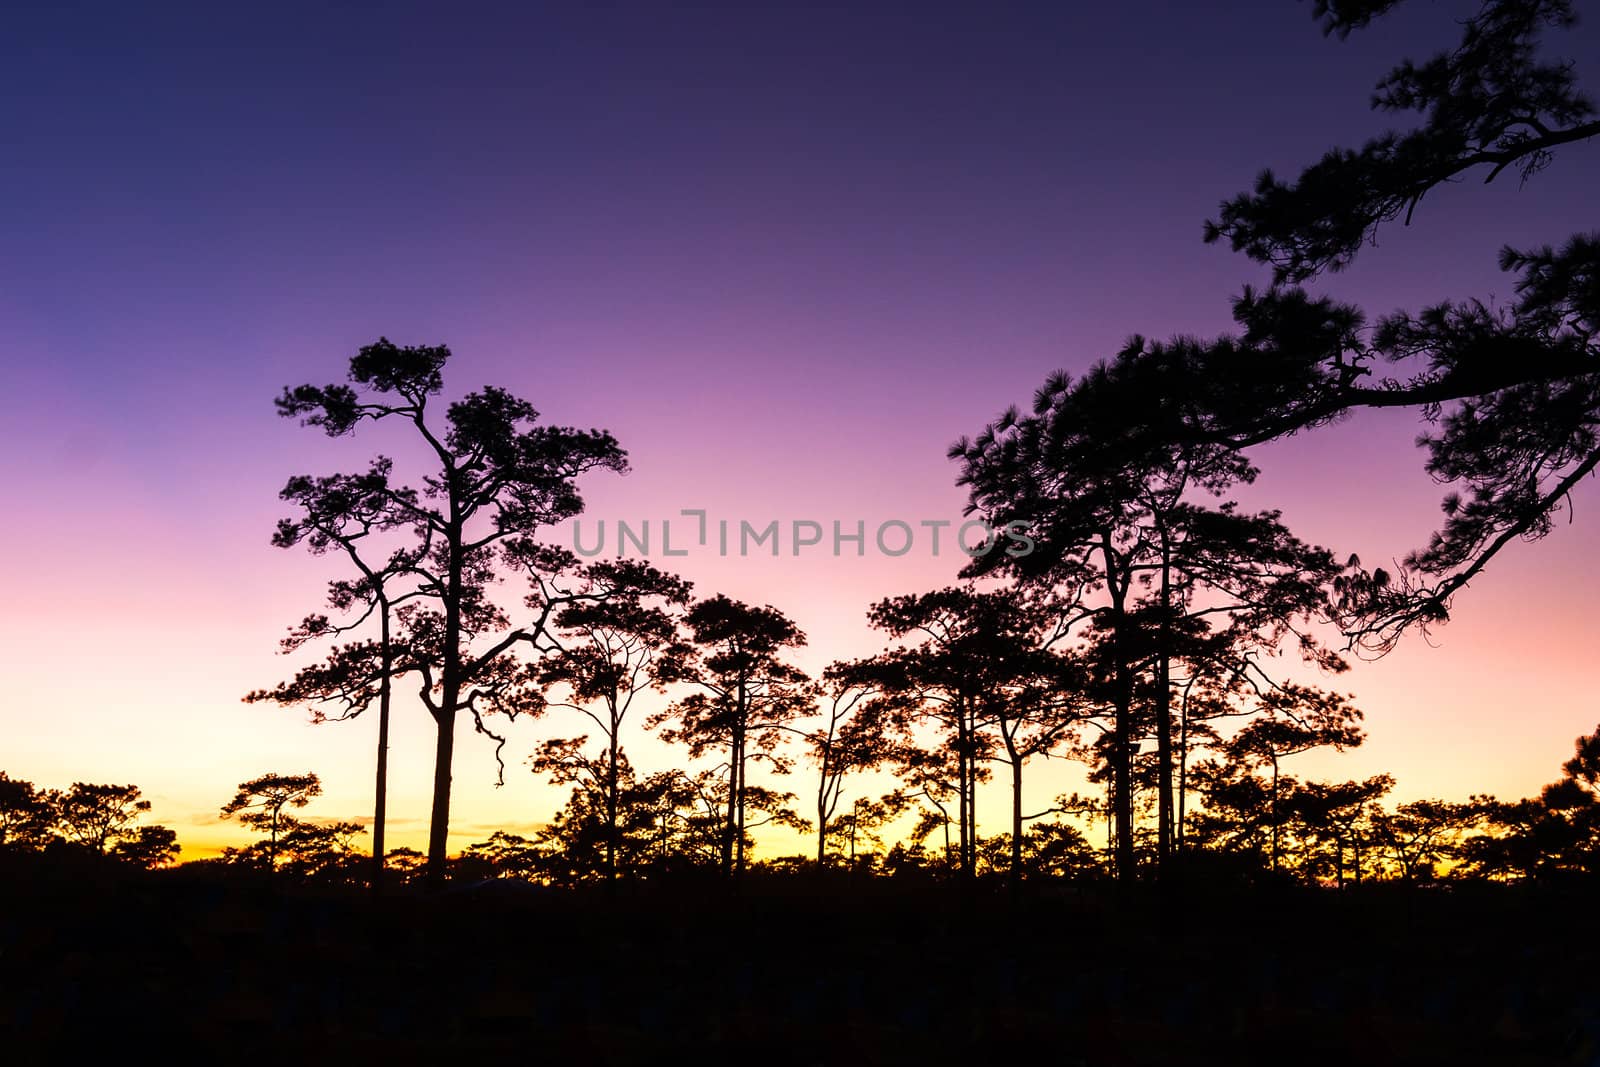 Sunset and Pine Trees  by jame_j@homail.com